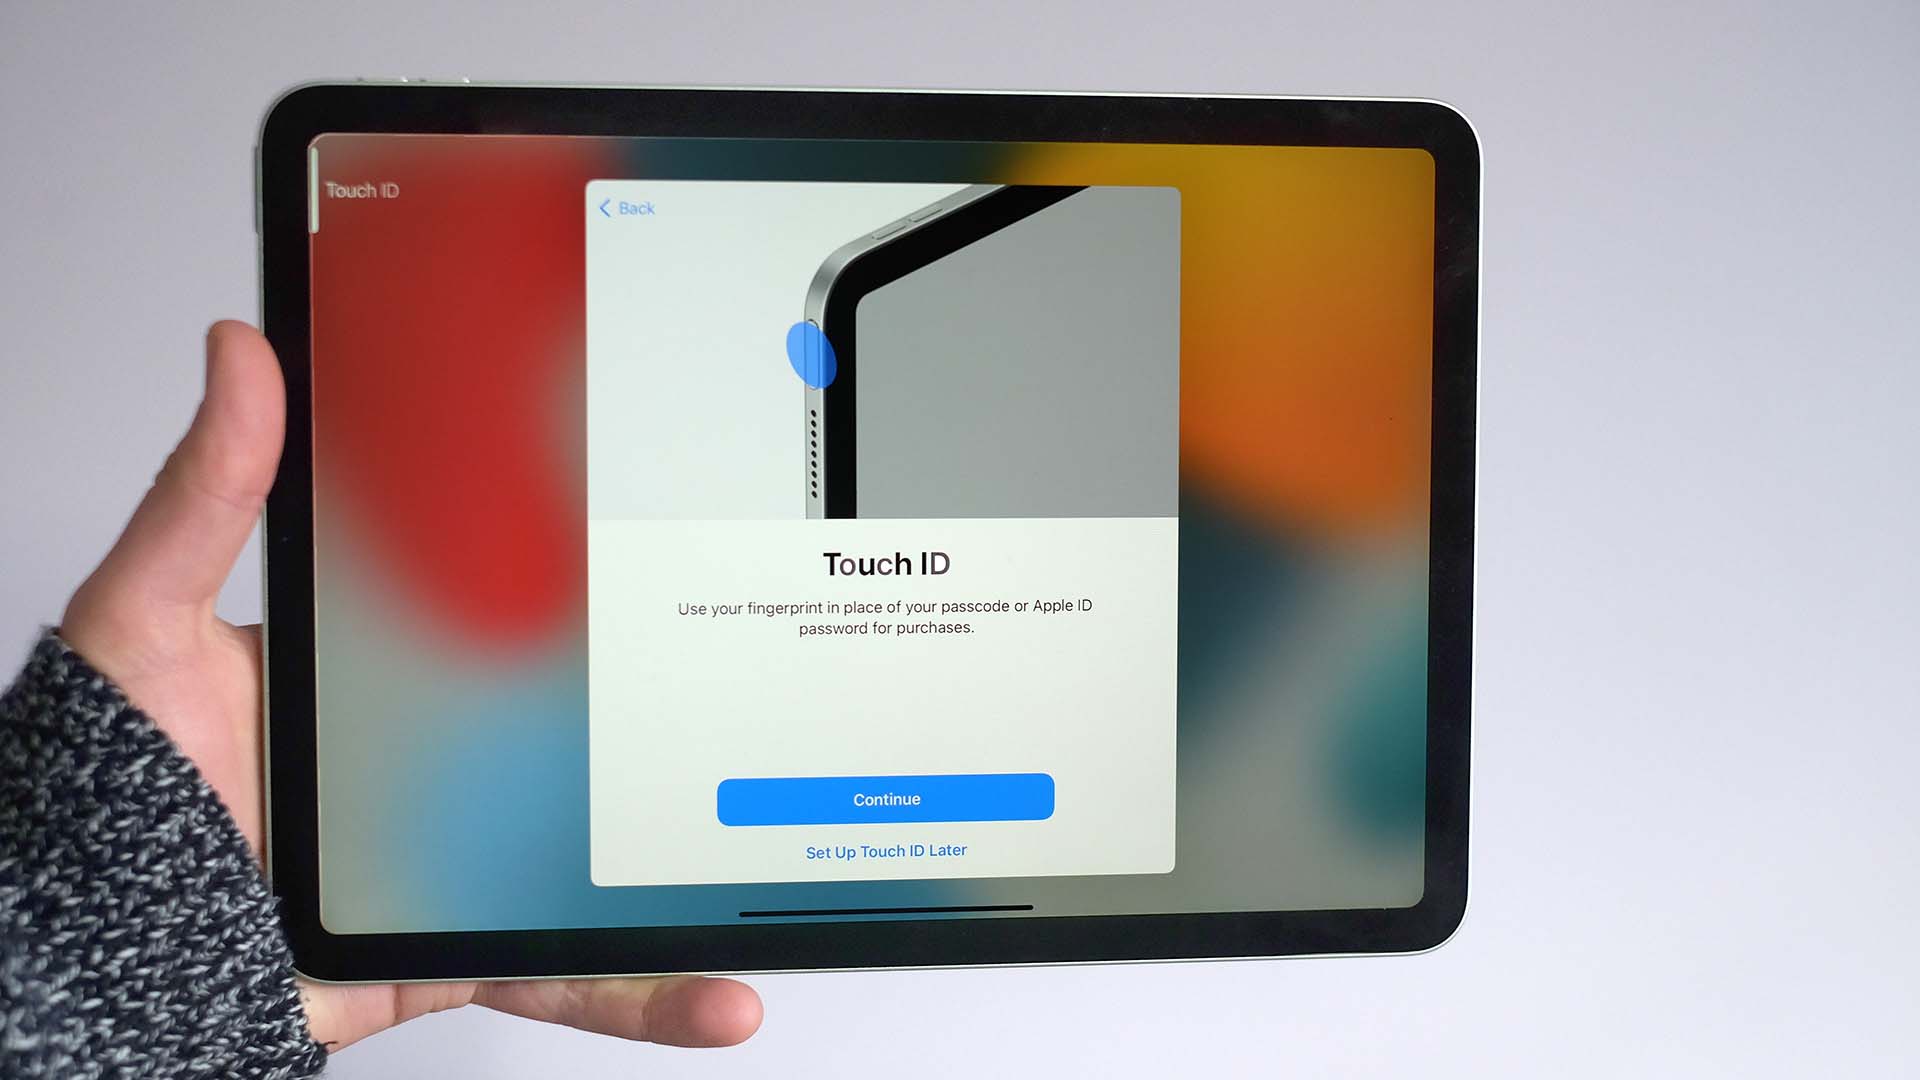 An iPad with the screen showing the options for touch ID